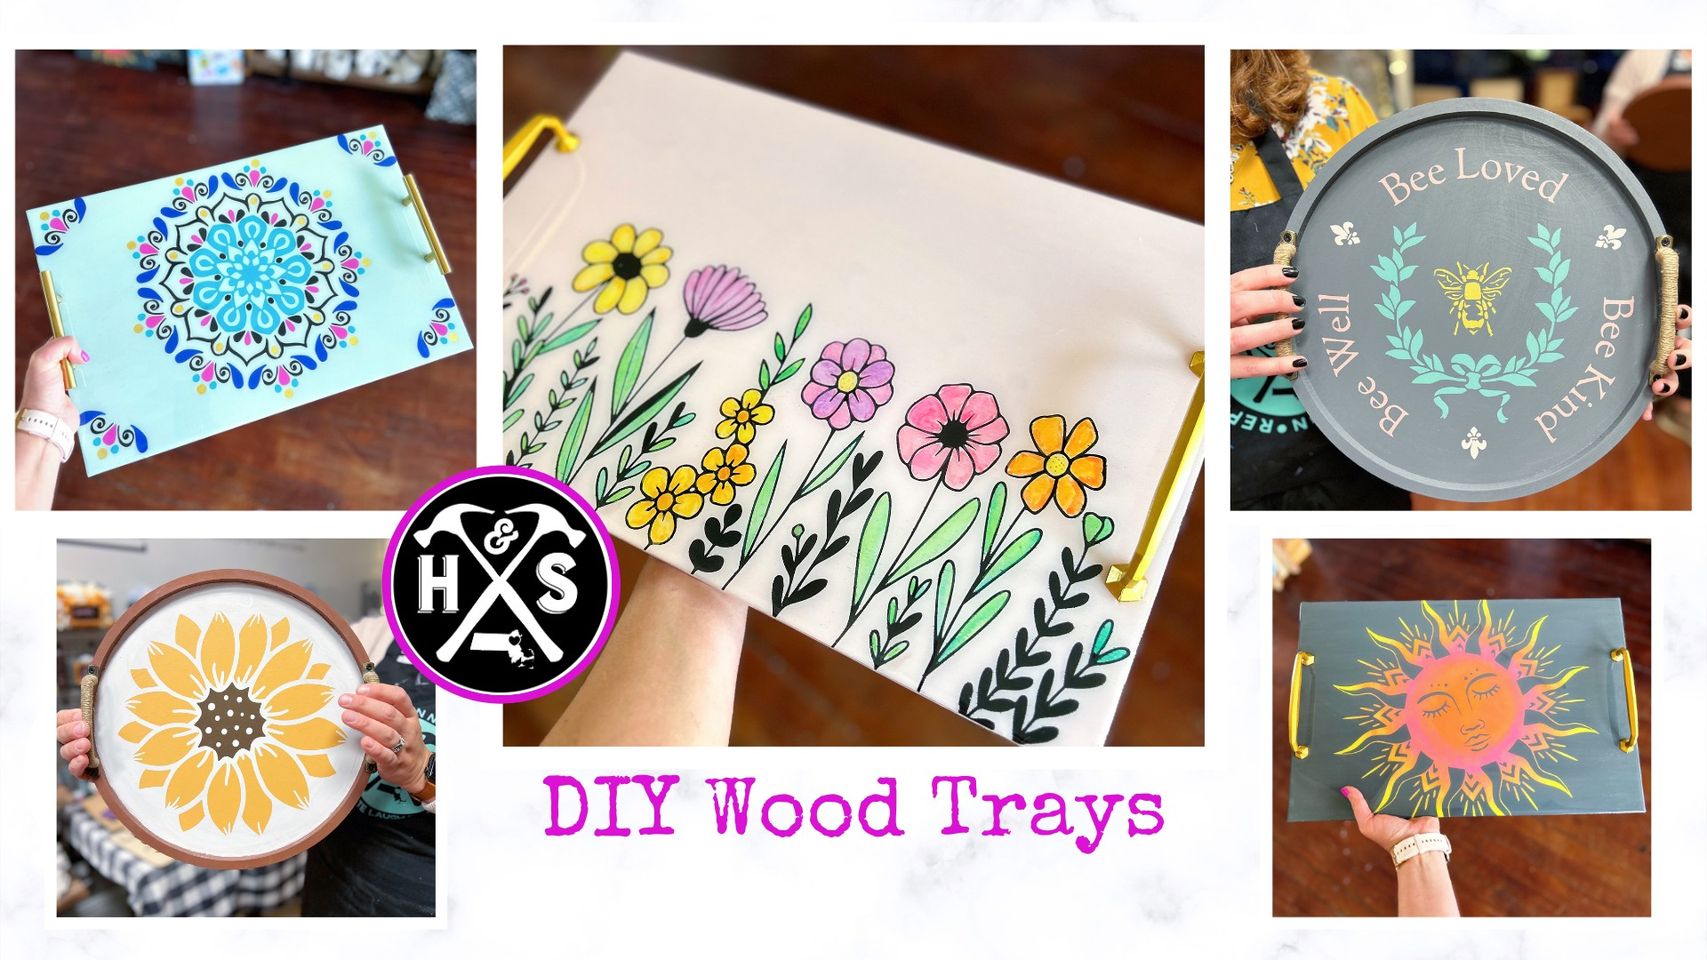 Explore a collection of DIY wood tray painting projects showcasing colorful floral and mandala patterns. The main focus features a distinct logo and the phrase "DIY wood trays".